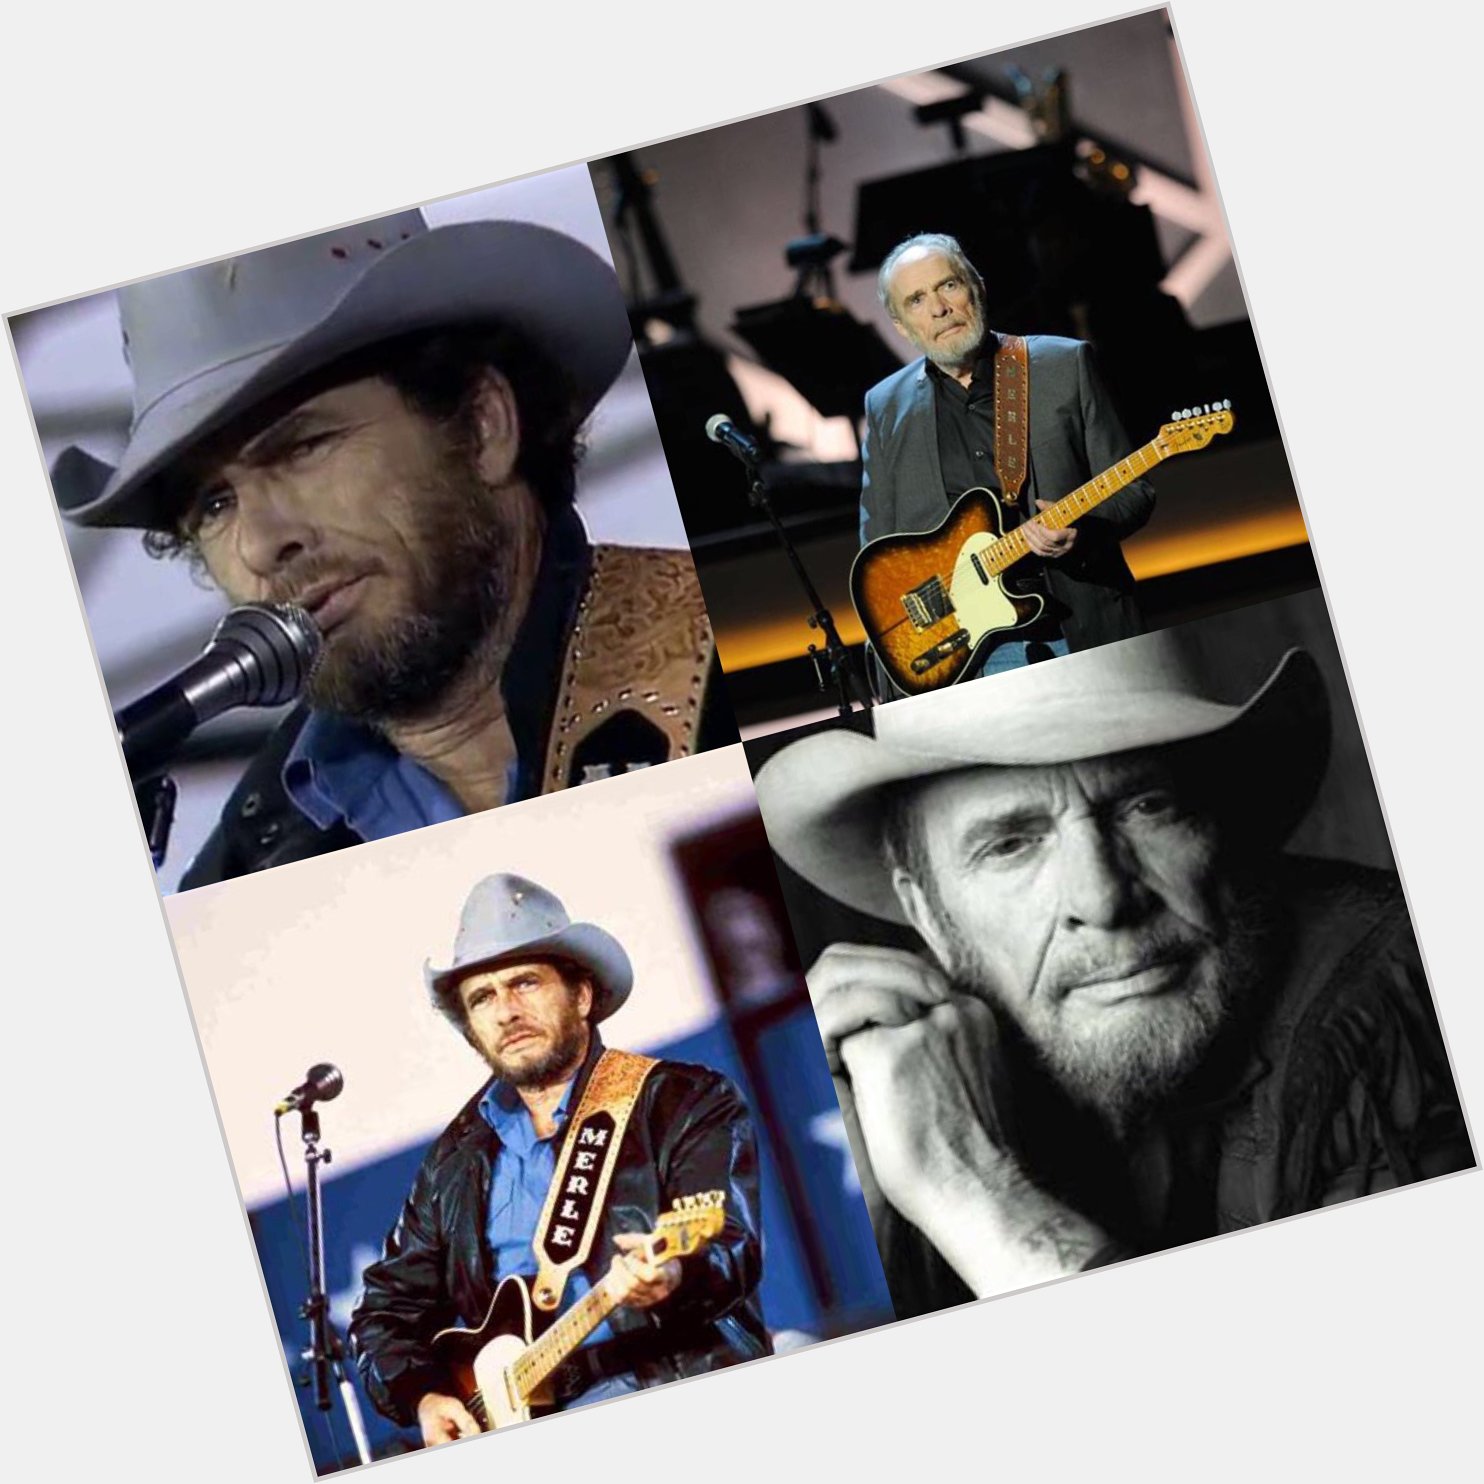 Happy 83 birthday to Merle Haggard  up in heaven. May he Rest In Peace.  